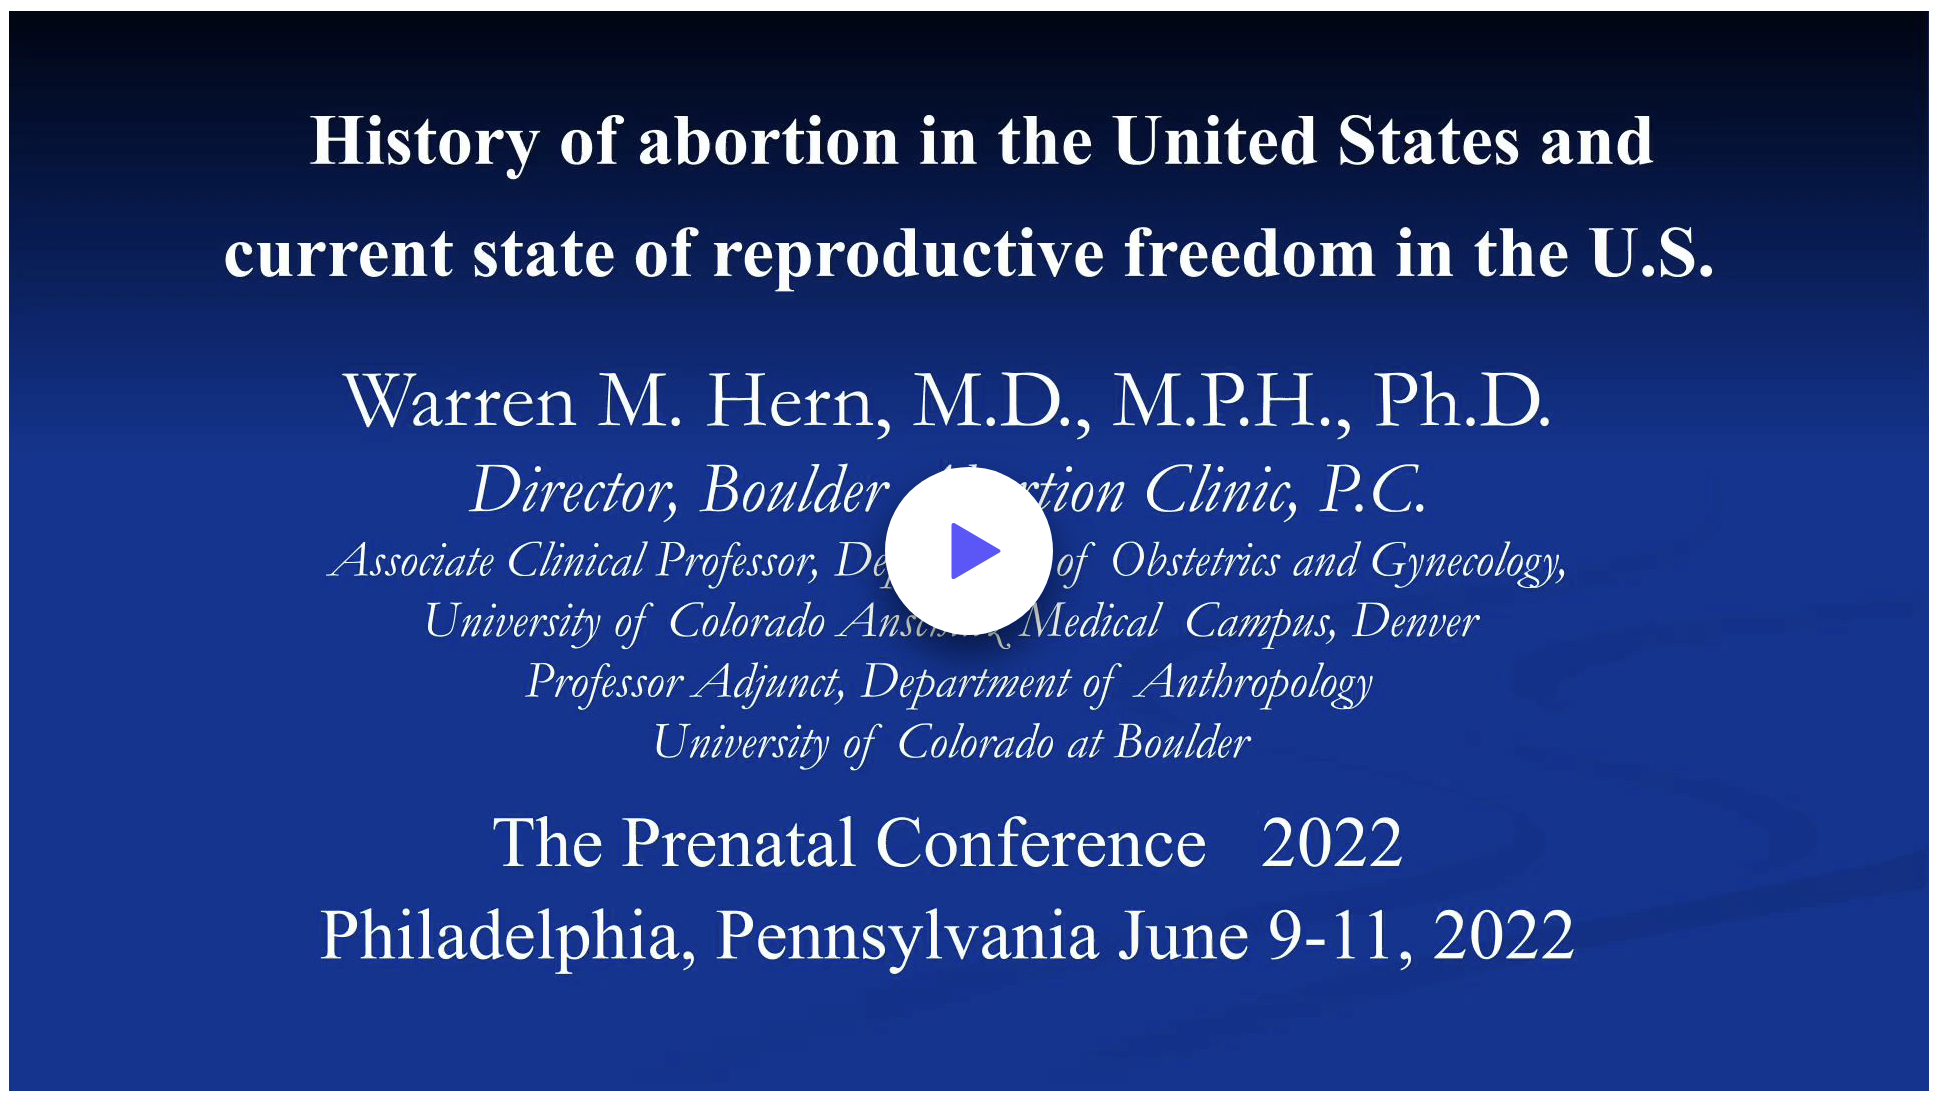 History of Abortion in the US by Warren Hern, MD